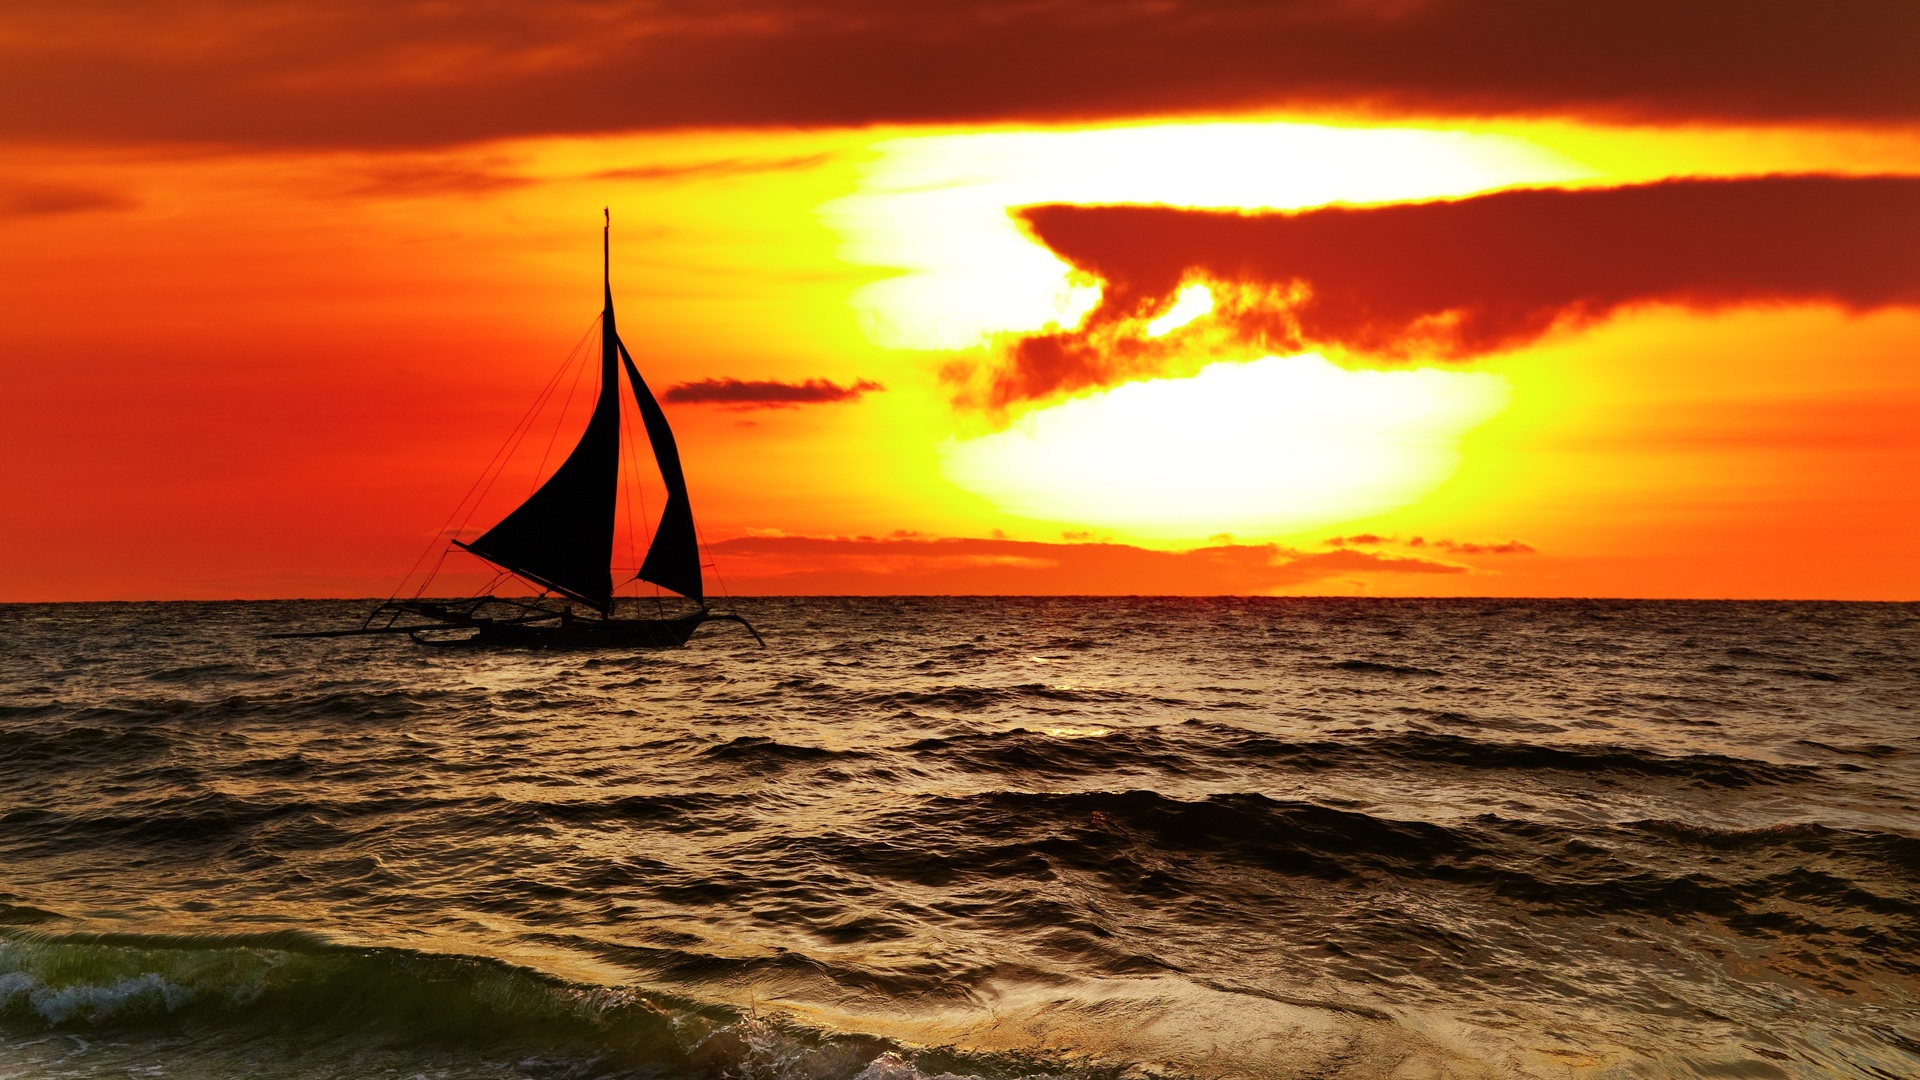 Sea, Scenery Sunset, Boracay, Clouds, Landscape, Sailboat, - Beautiful Scenery In The Philippines - HD Wallpaper 